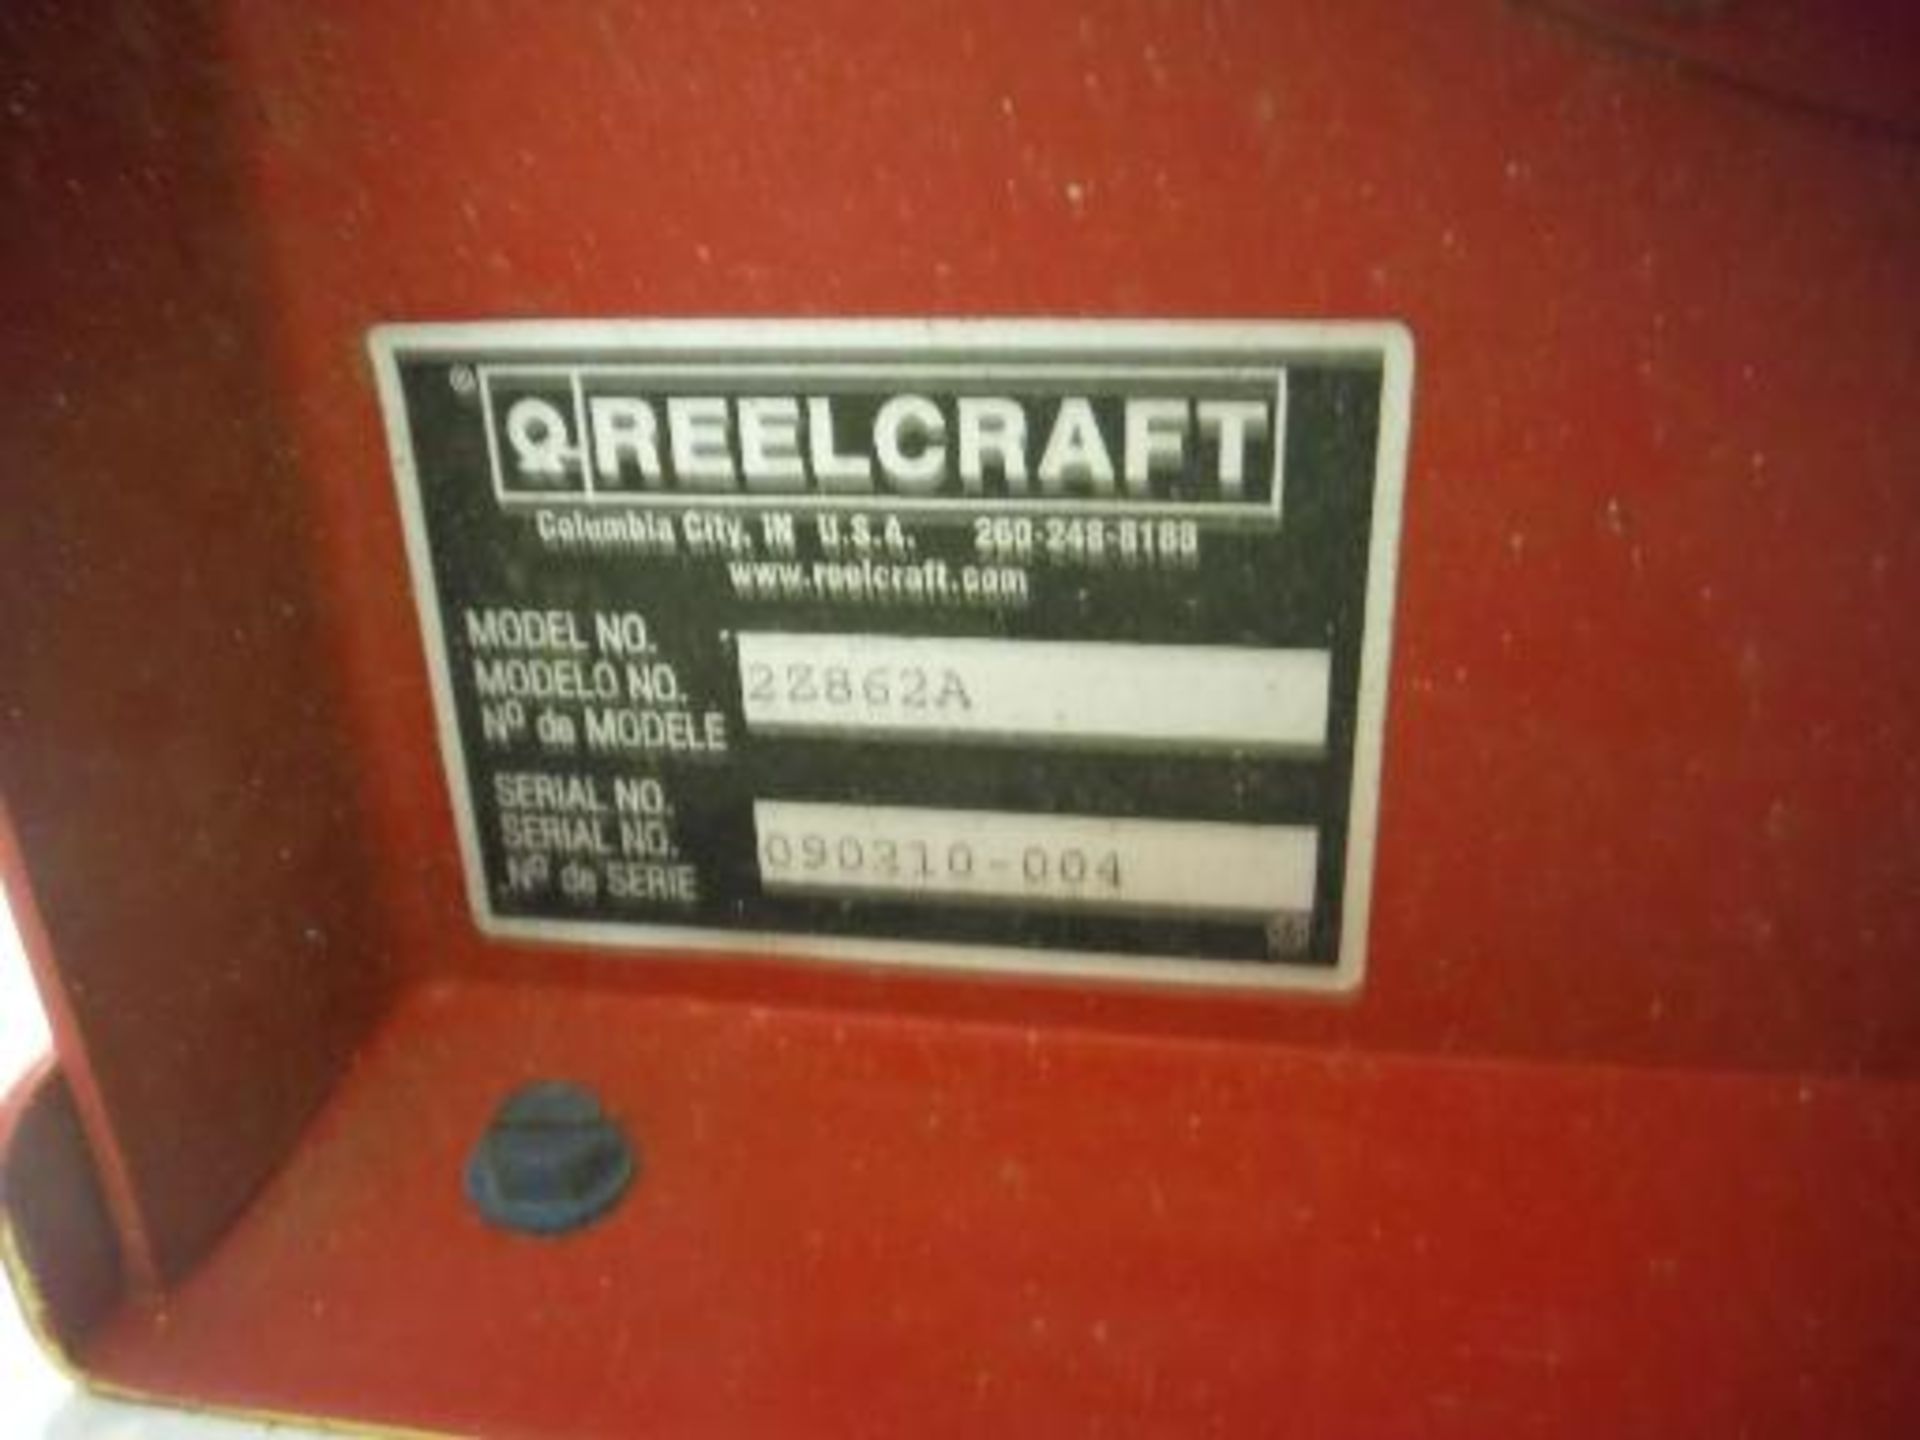 Reel Craft air hose reel and air hose attachment. Located in Marion, Ohio Rigging Fee: $50 - Image 2 of 2